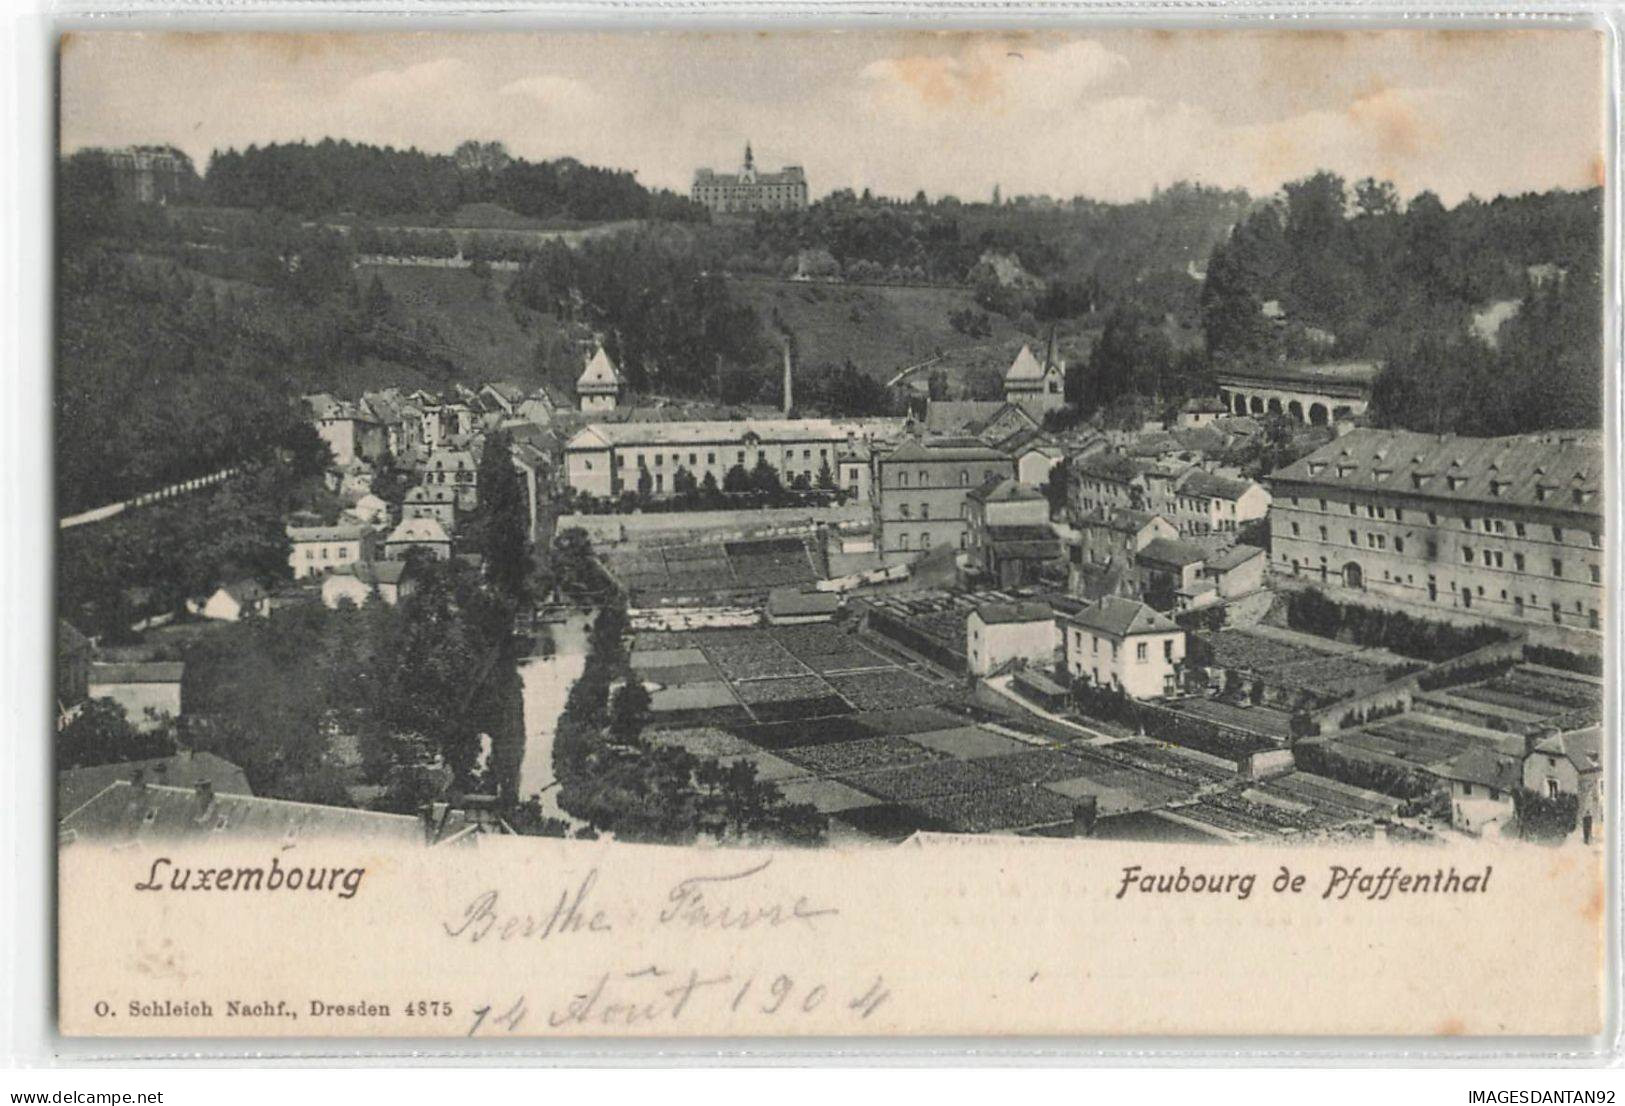 LUXEMBOURG #FG51917 FAUBOURG DE PFAFFENTHAL - Luxembourg - Ville